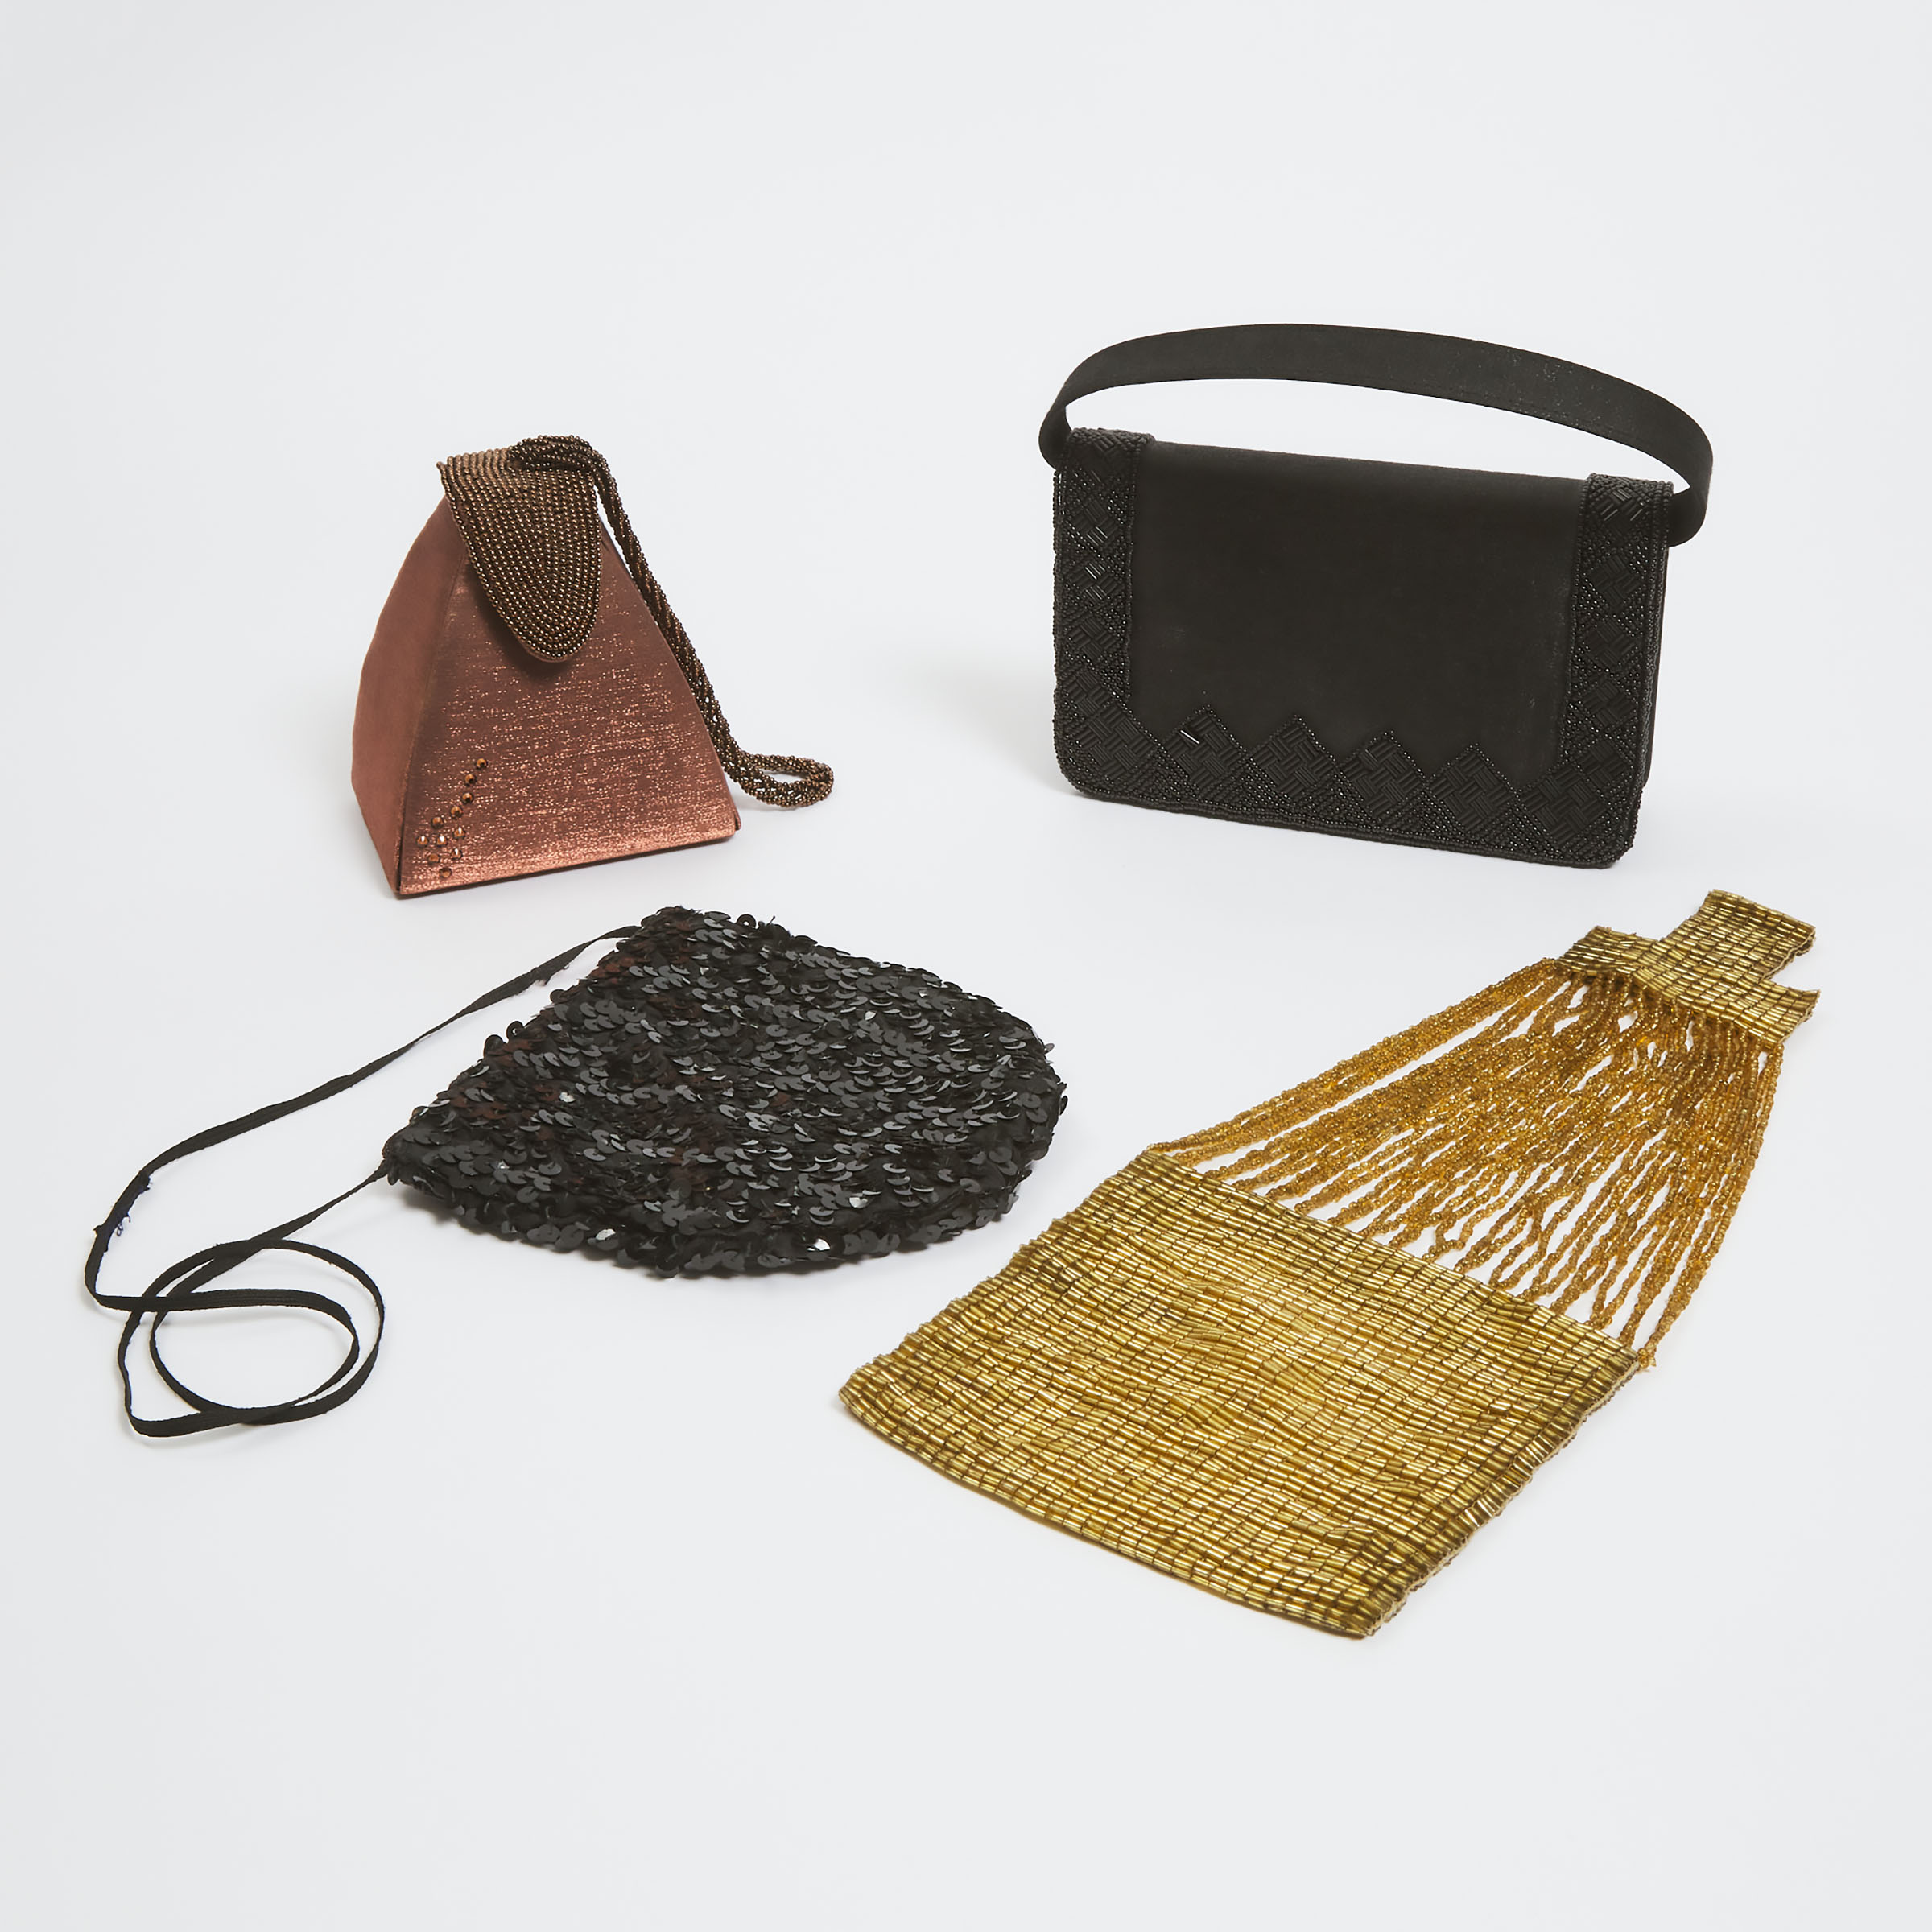 Four Beaded or Sequined Evening Bags